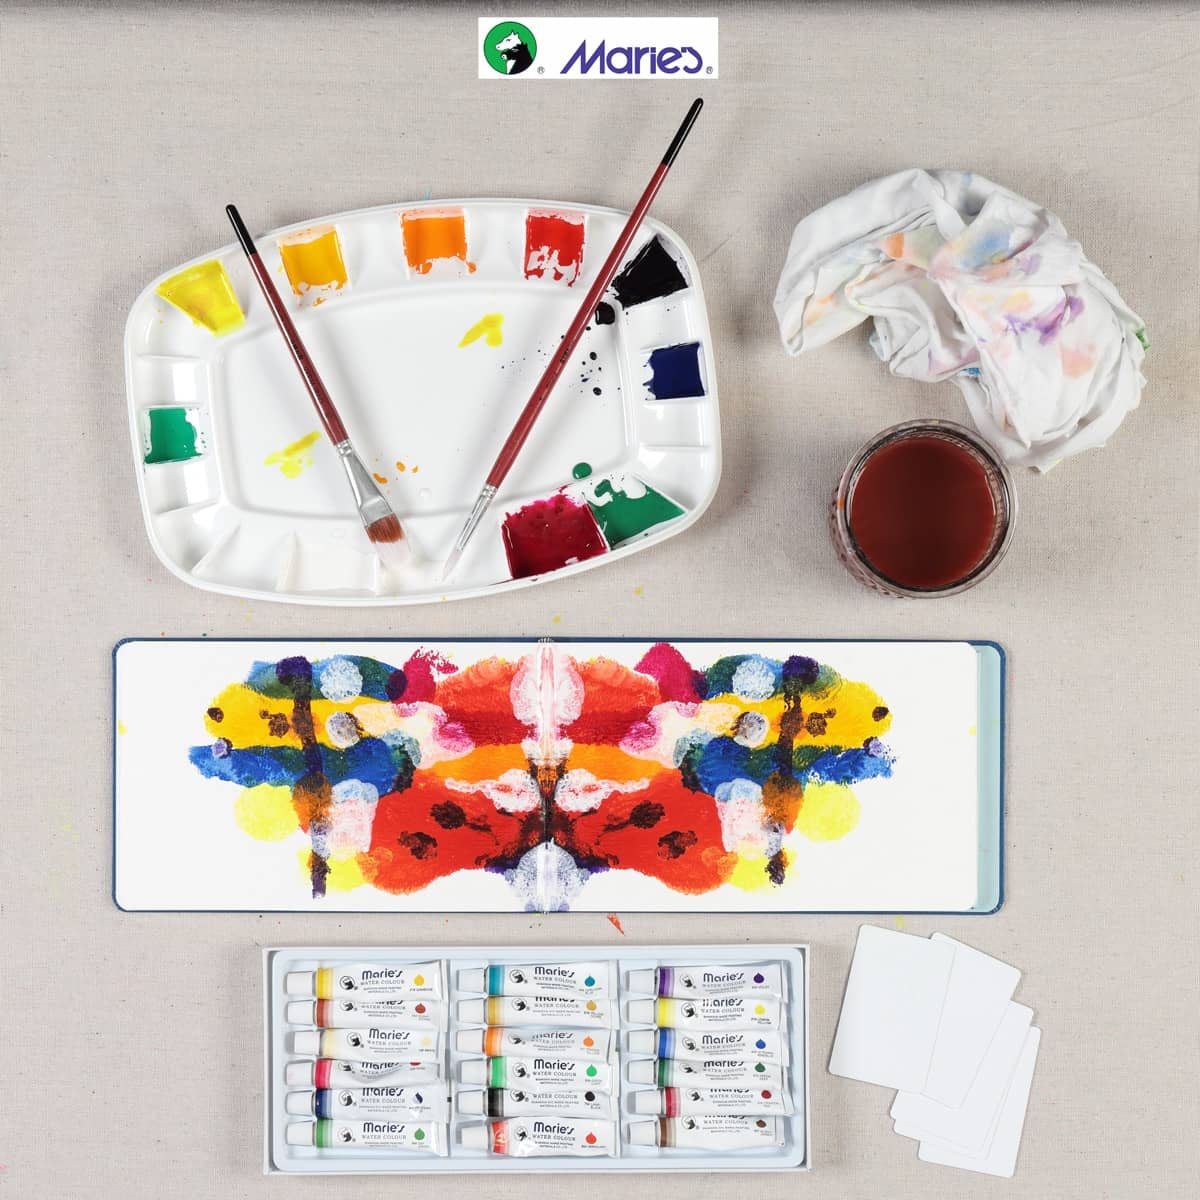 Raphael Kolinsky Round Watercolor Brushes and Sets